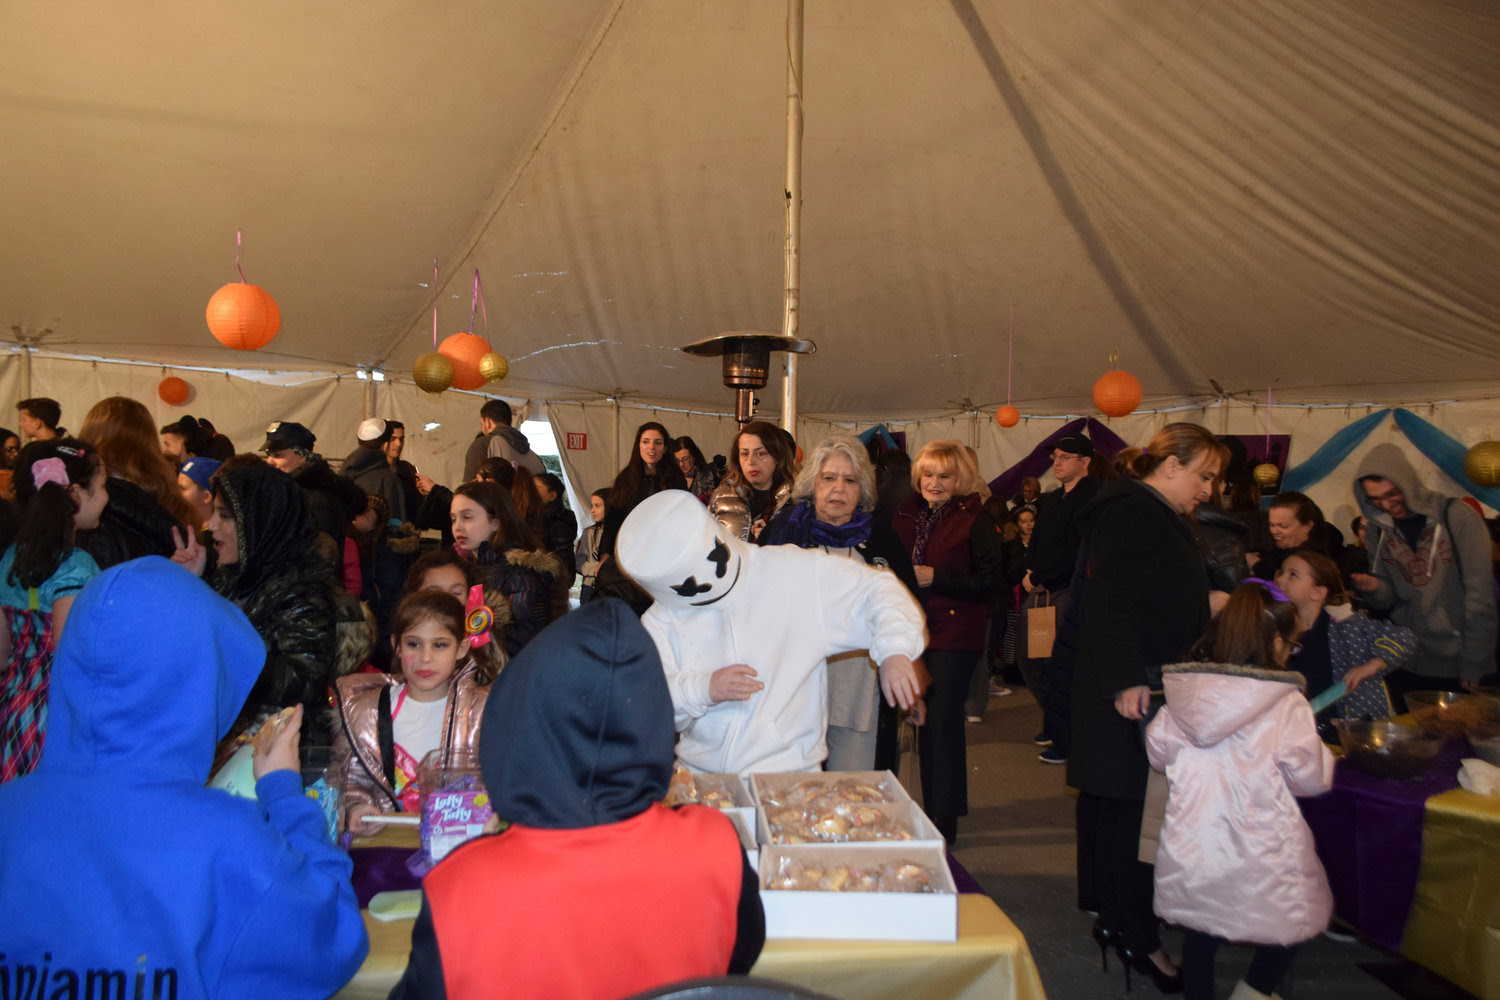 The Chabad House of Hewlett turned its backyard tent into a Persian palace for an Arabian night-themed Purim party on March 21.